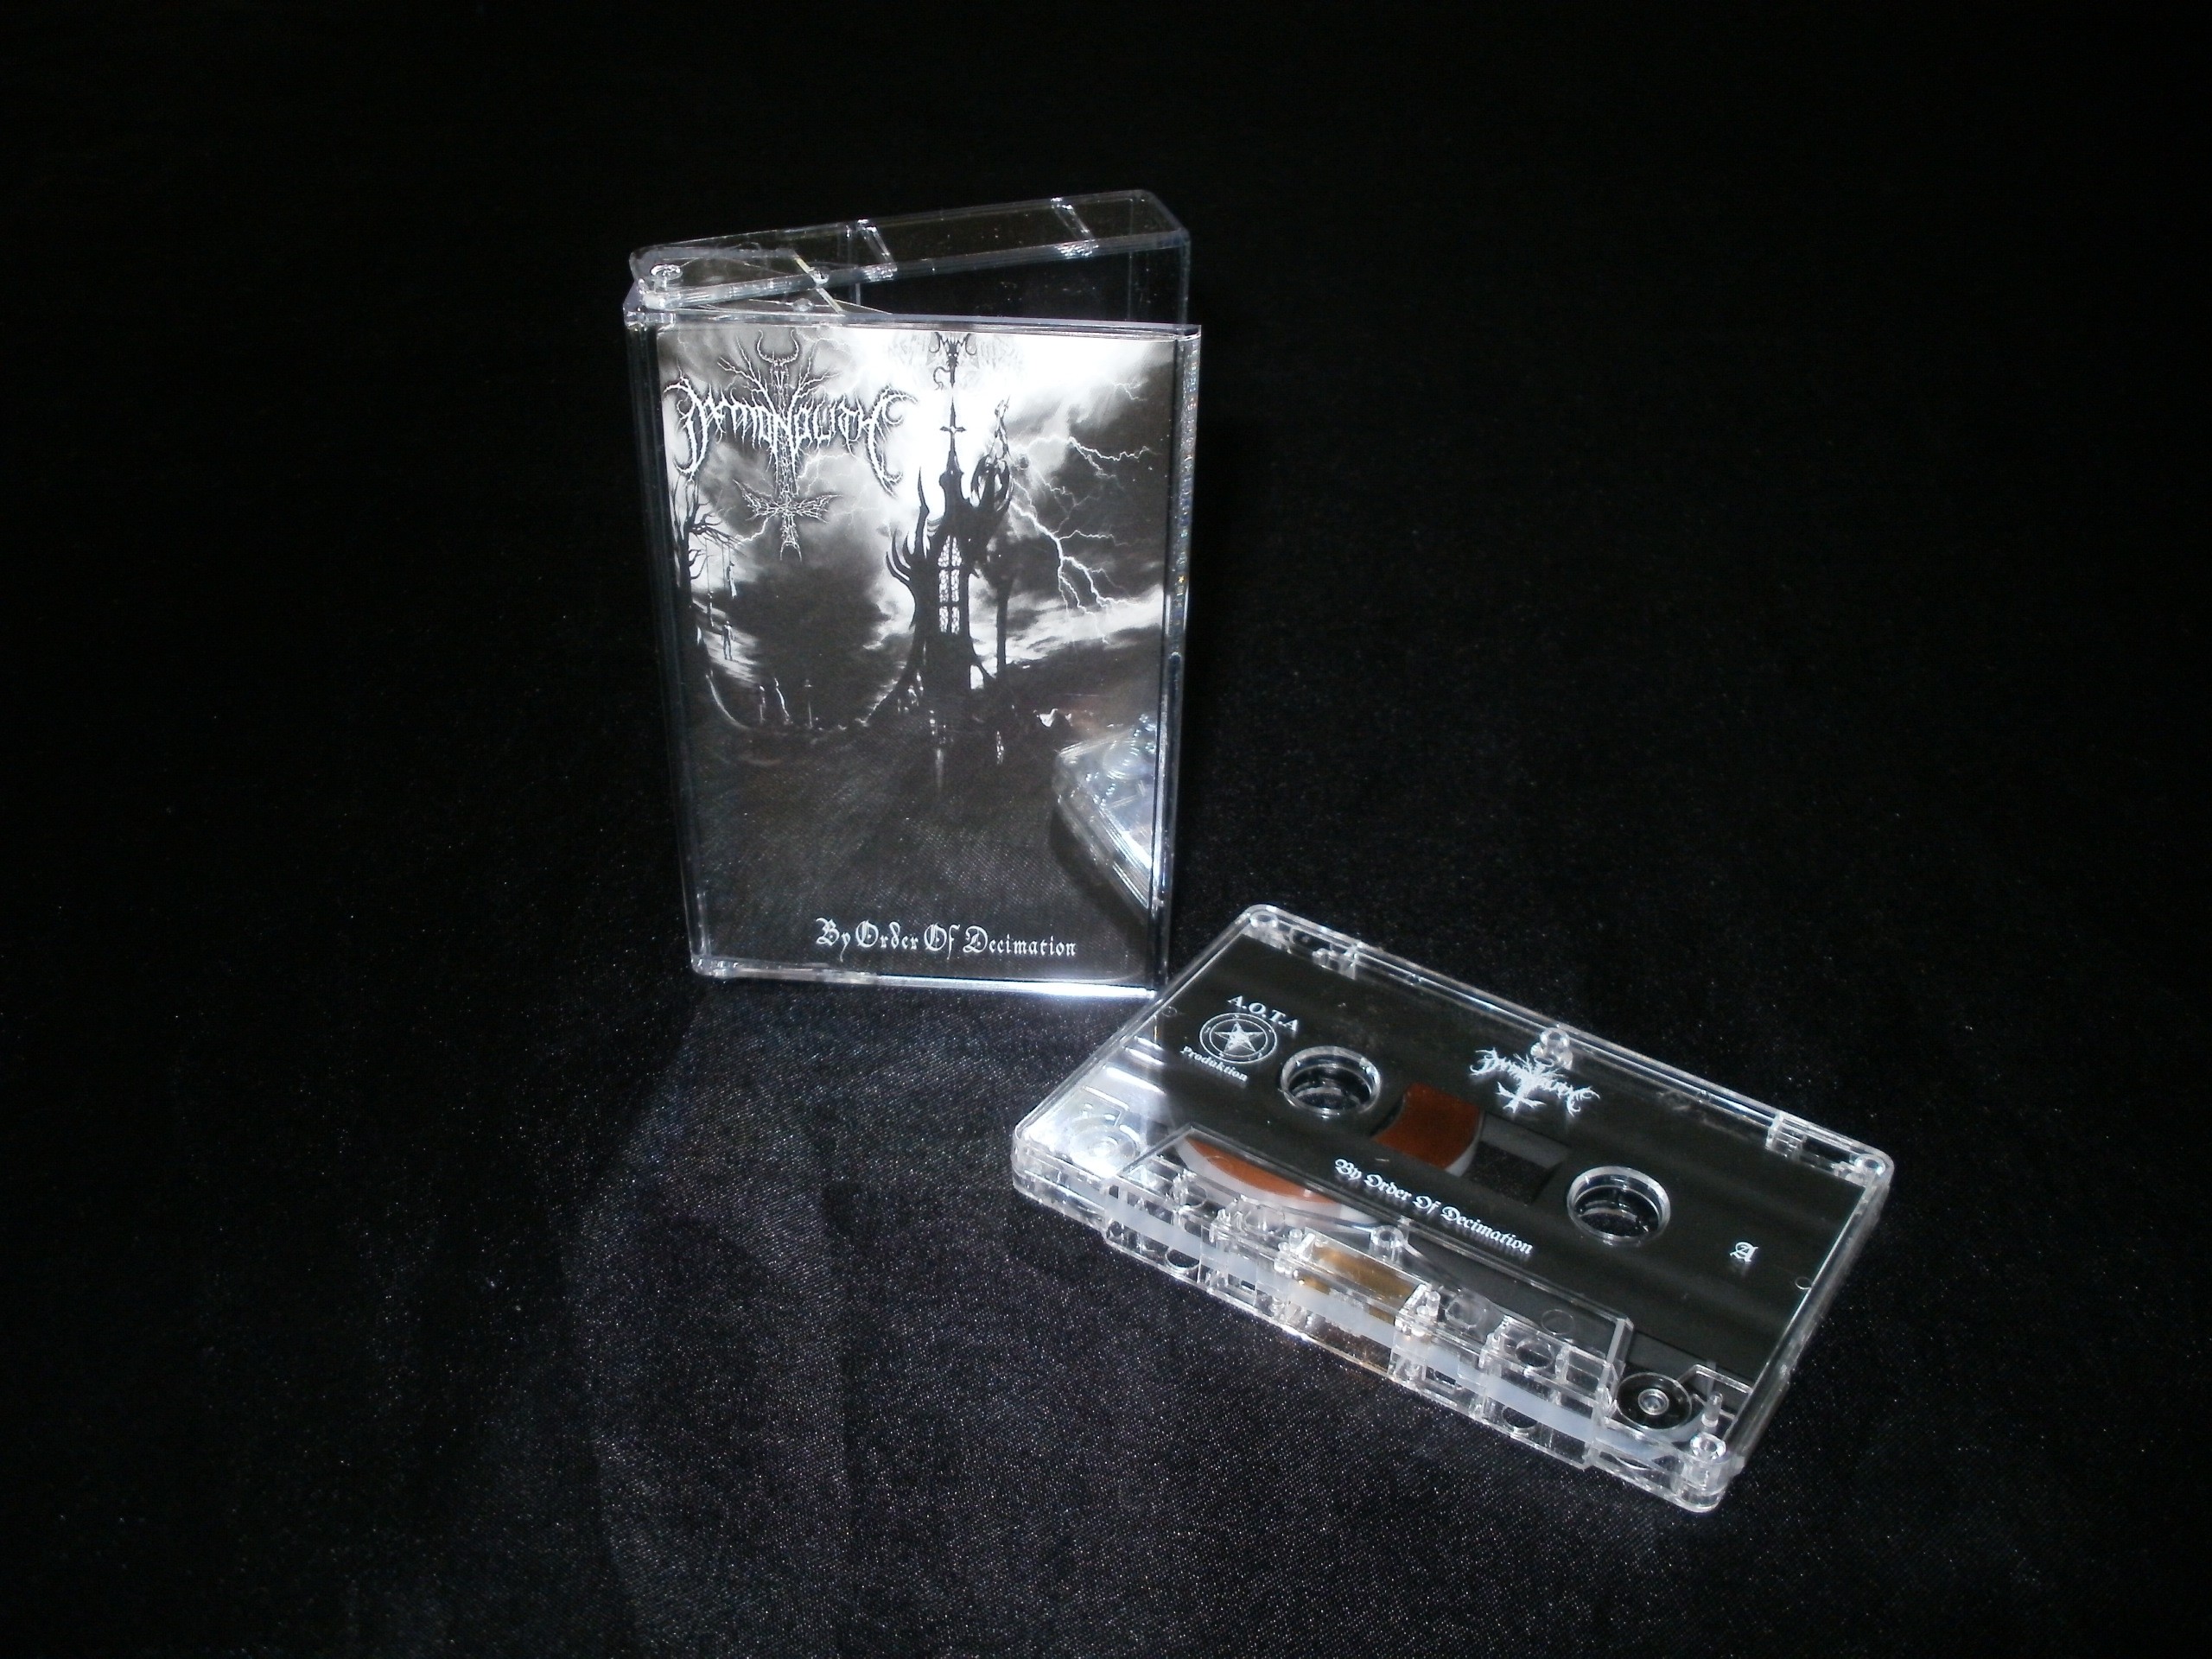 DAEMONOLITH - By order of Decimation Pro - Tape 